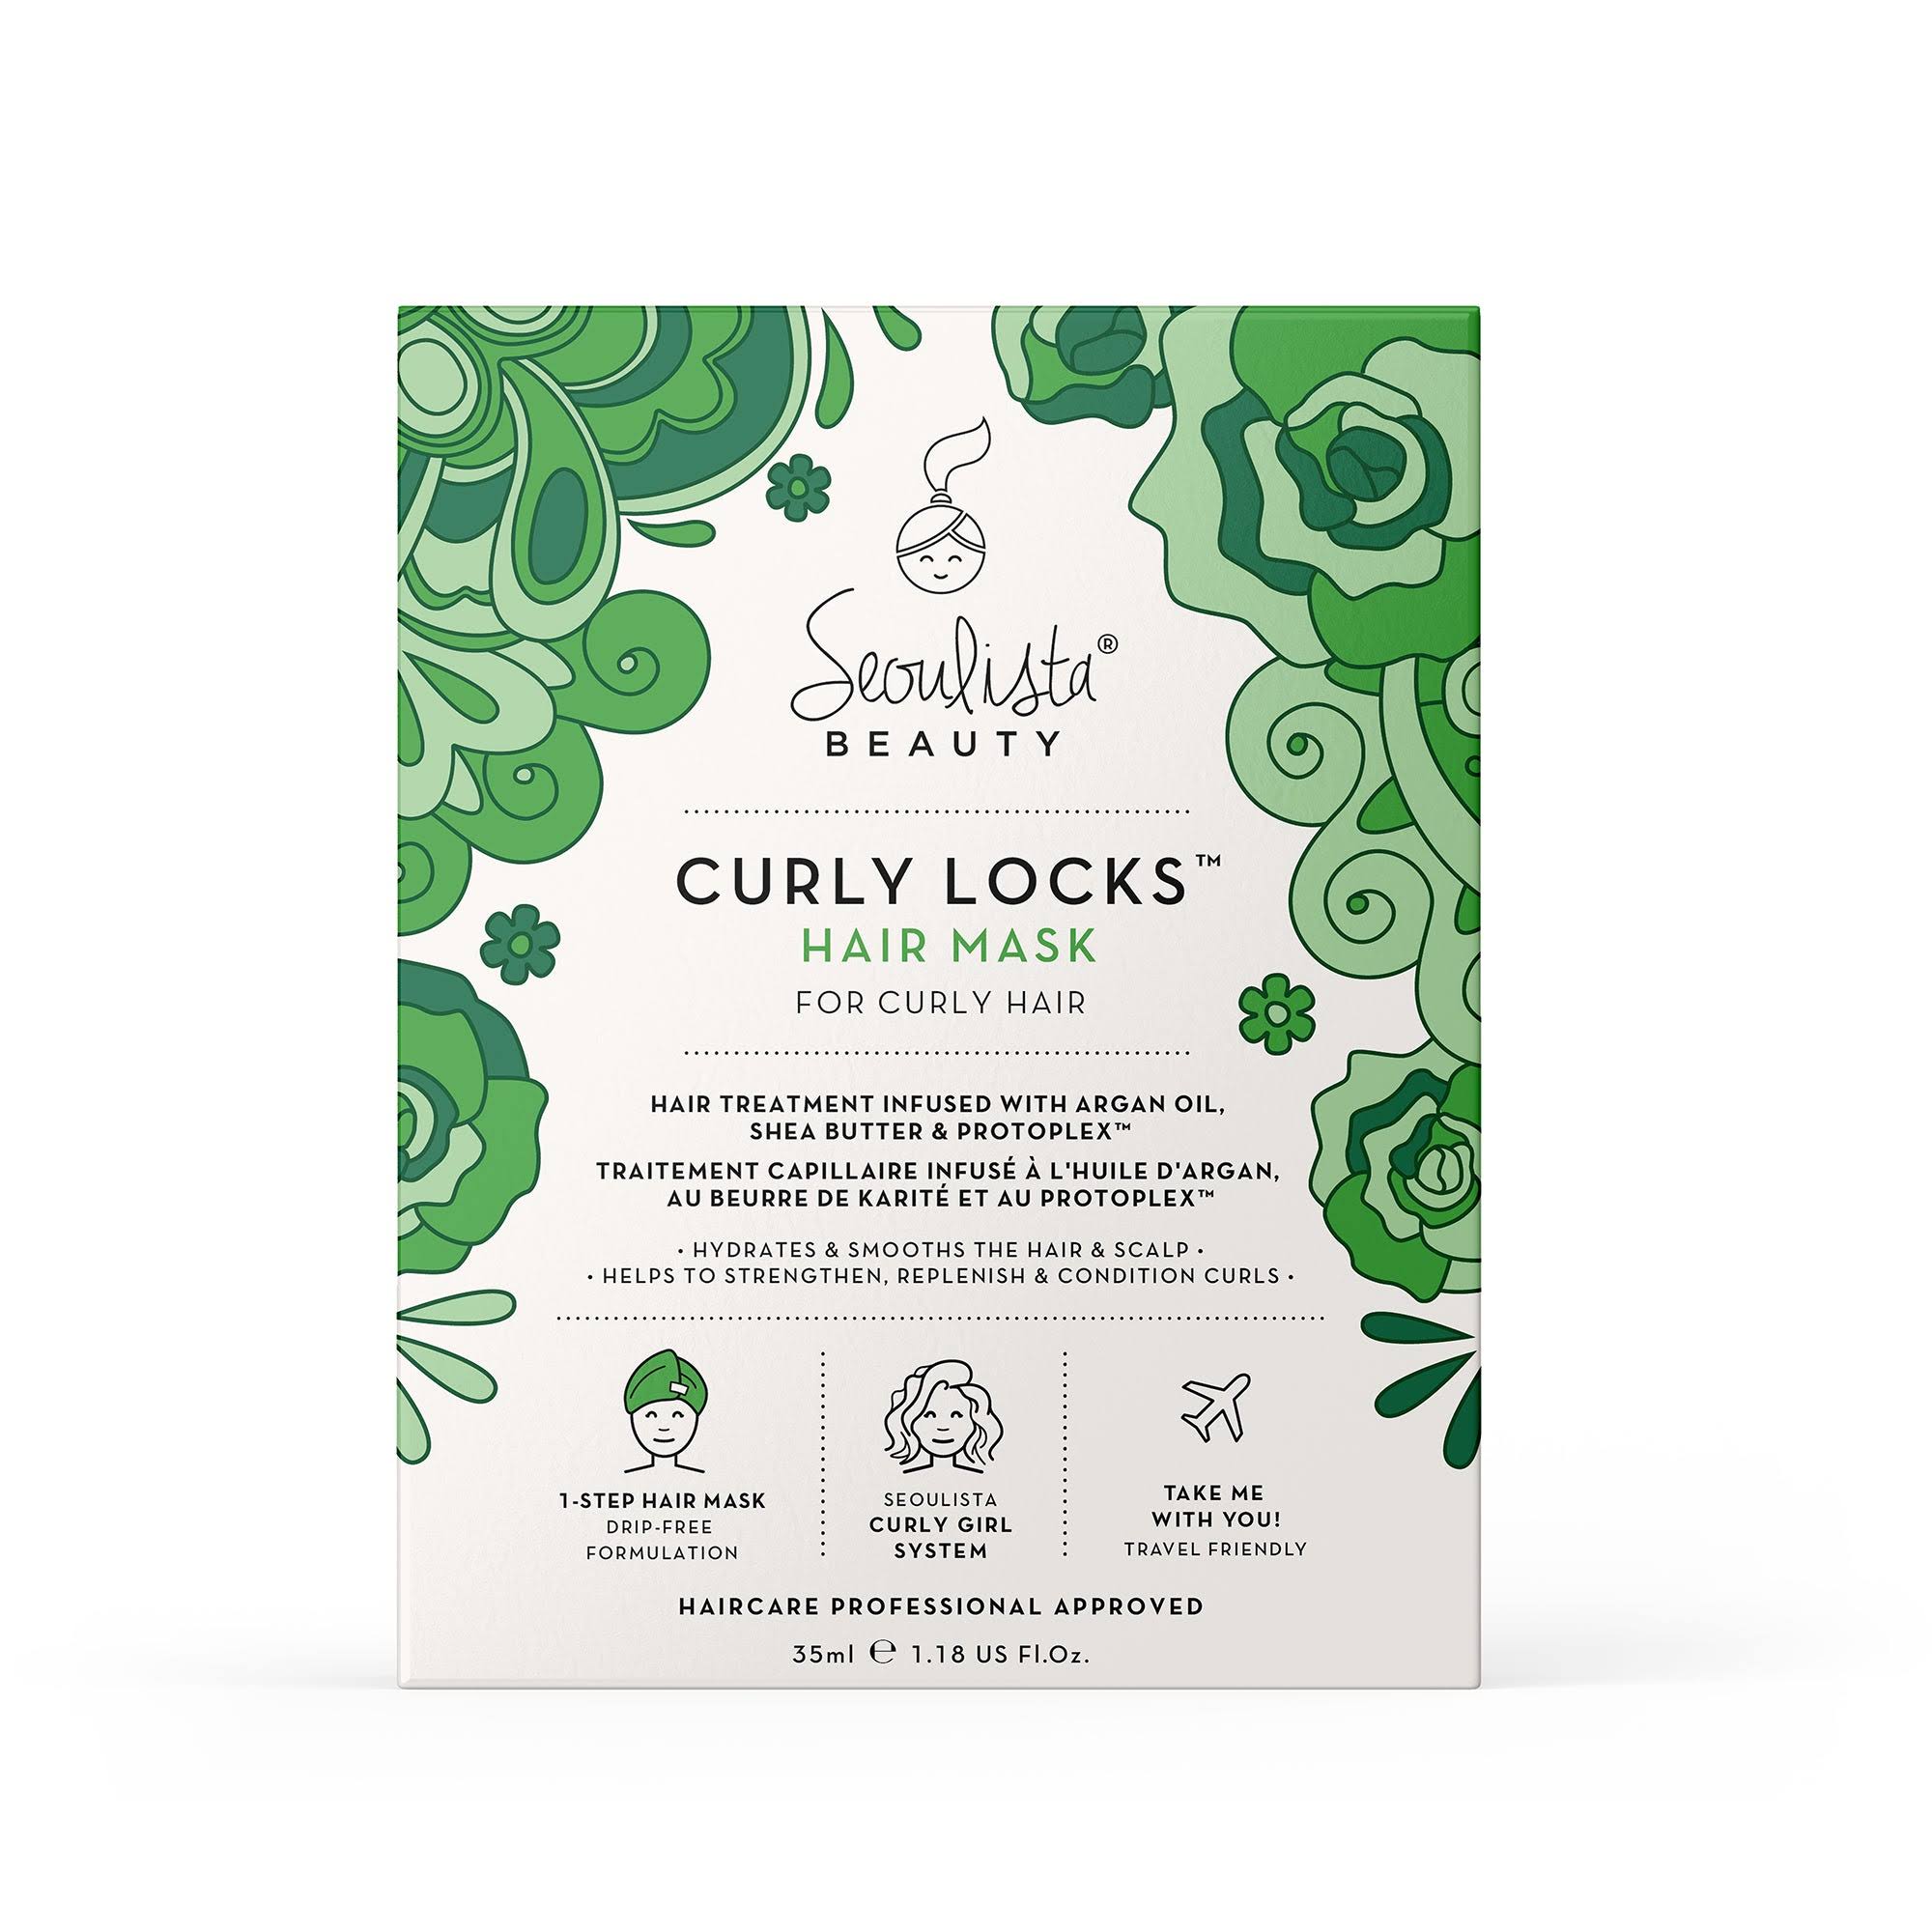 Seoulista Beauty Curly Locks Hair Mask - Curly, Wavy And Textured Hair